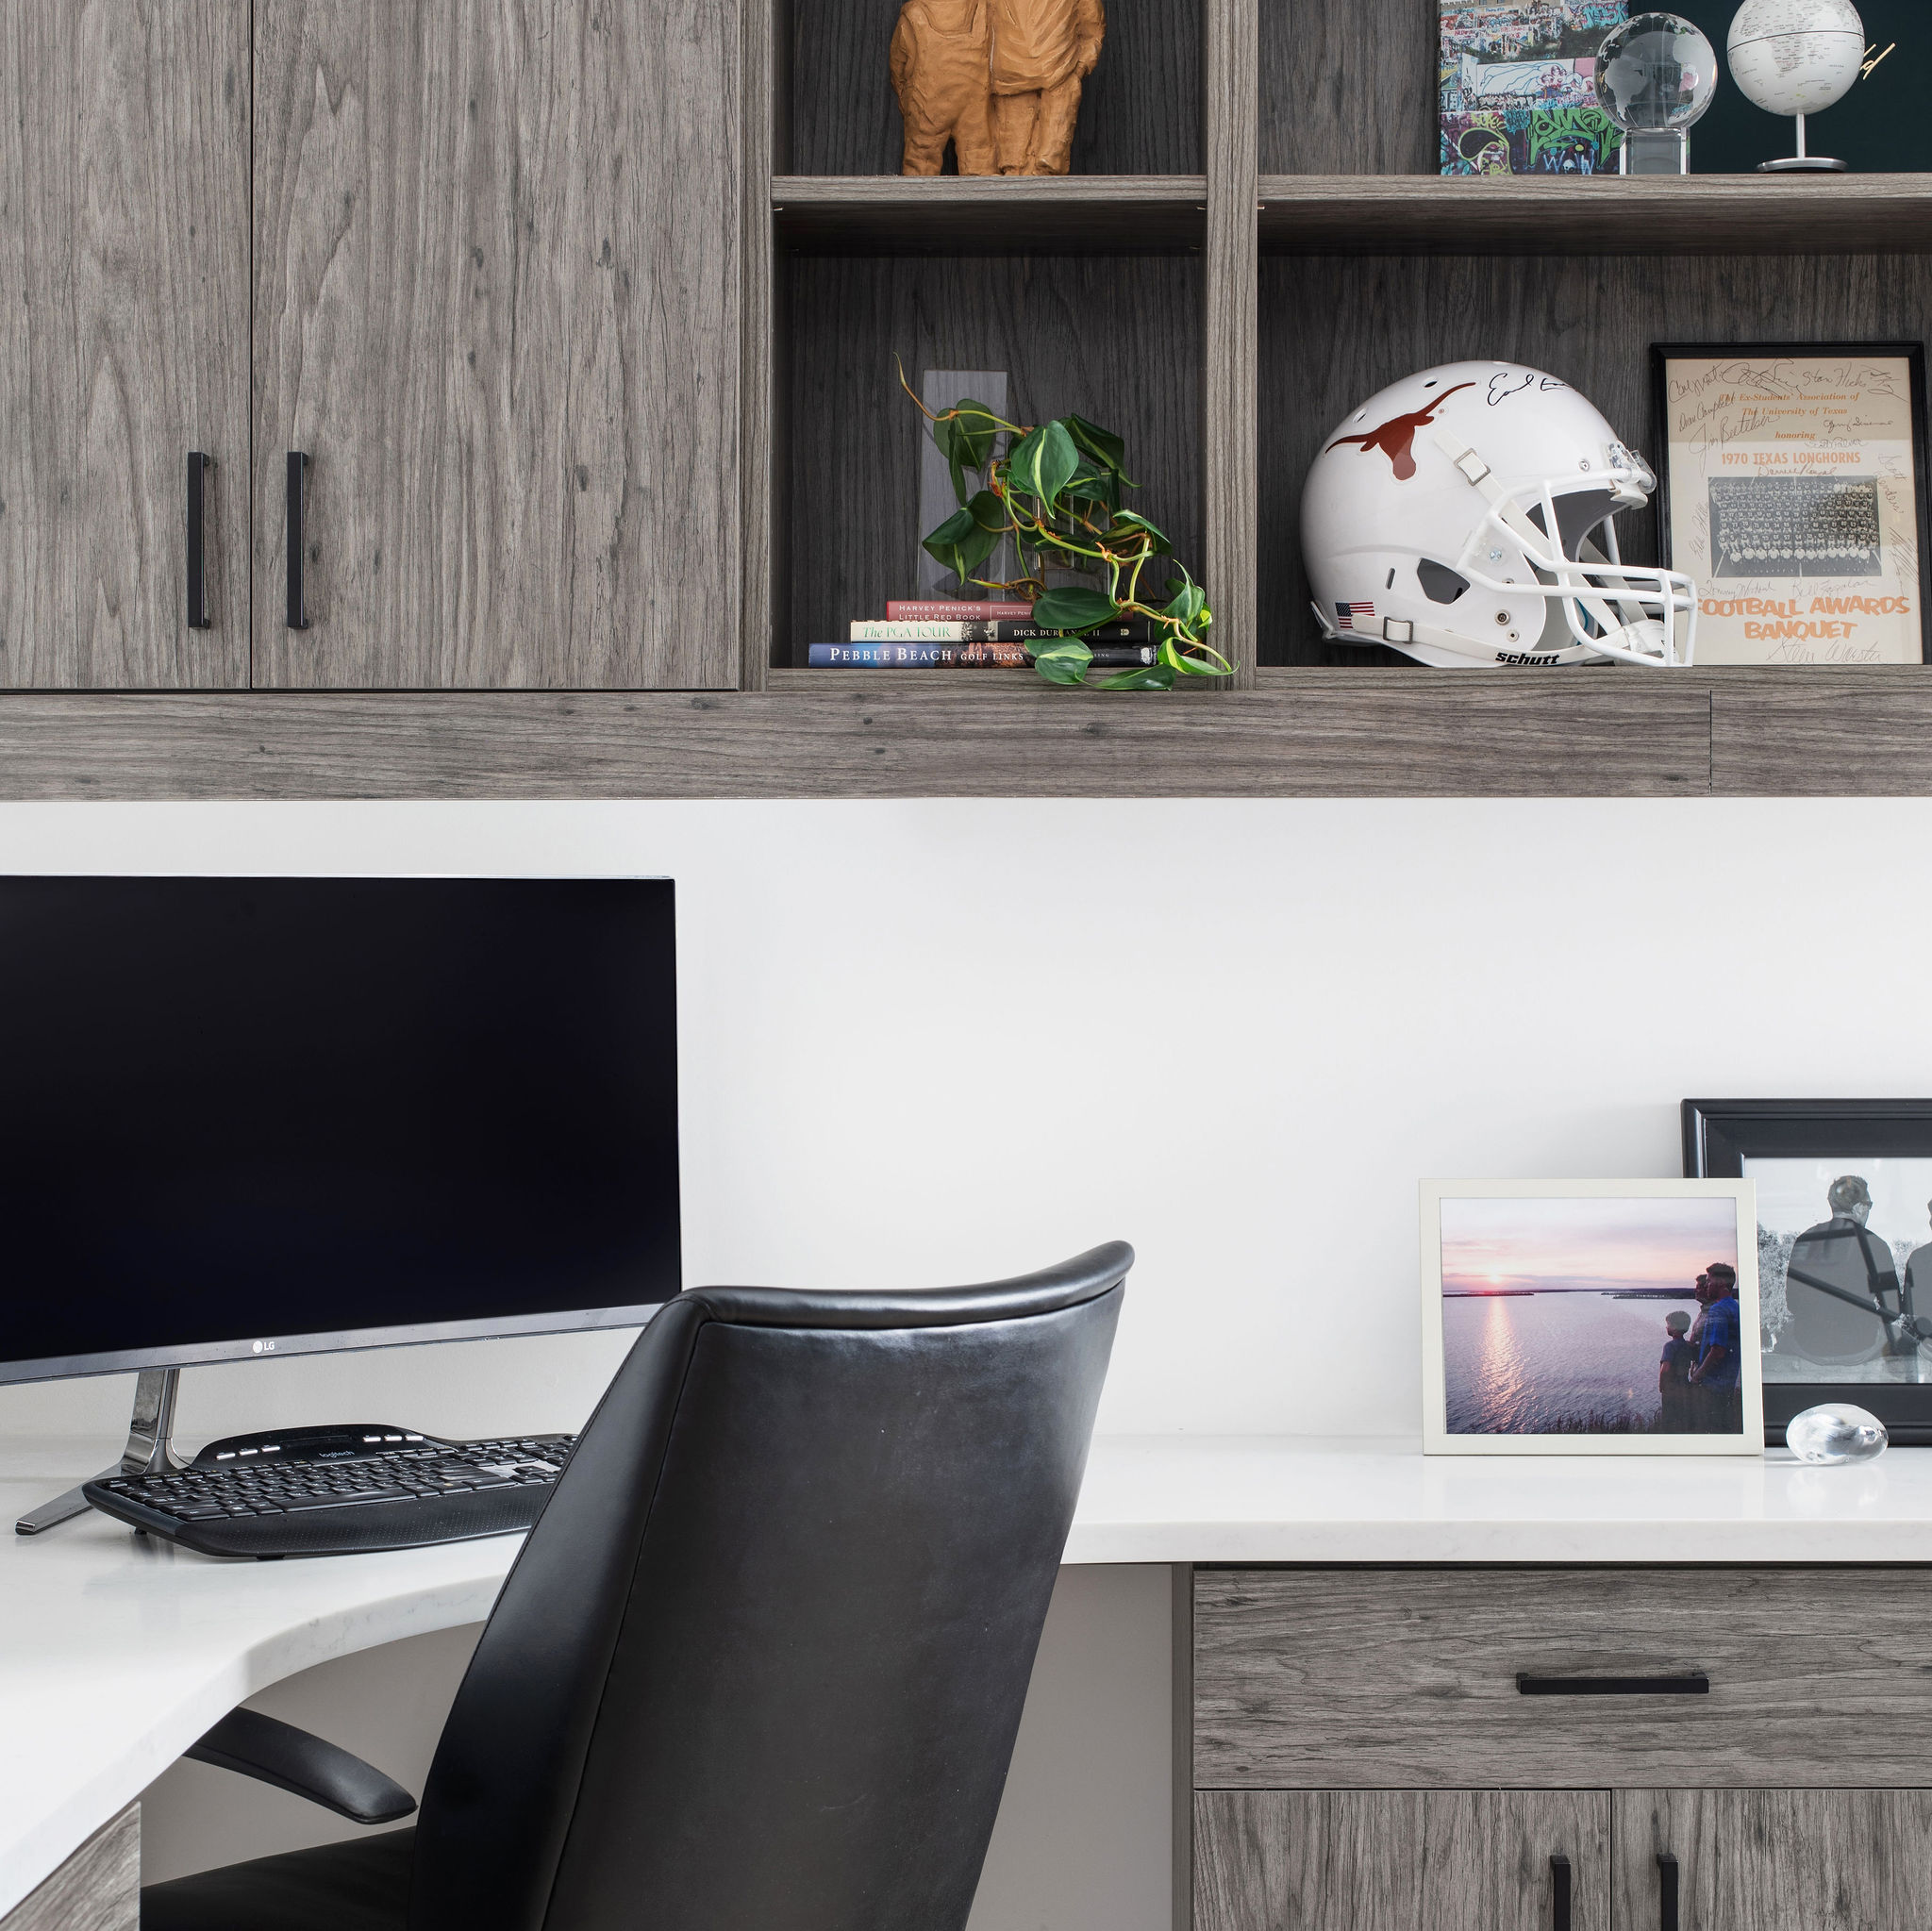 Maximize space with our Home Office. Enjoy a luxury home office and work from home effortlessly, combining functionality and style. Discover versatile solutions for small spaces. Consider a home office design today!